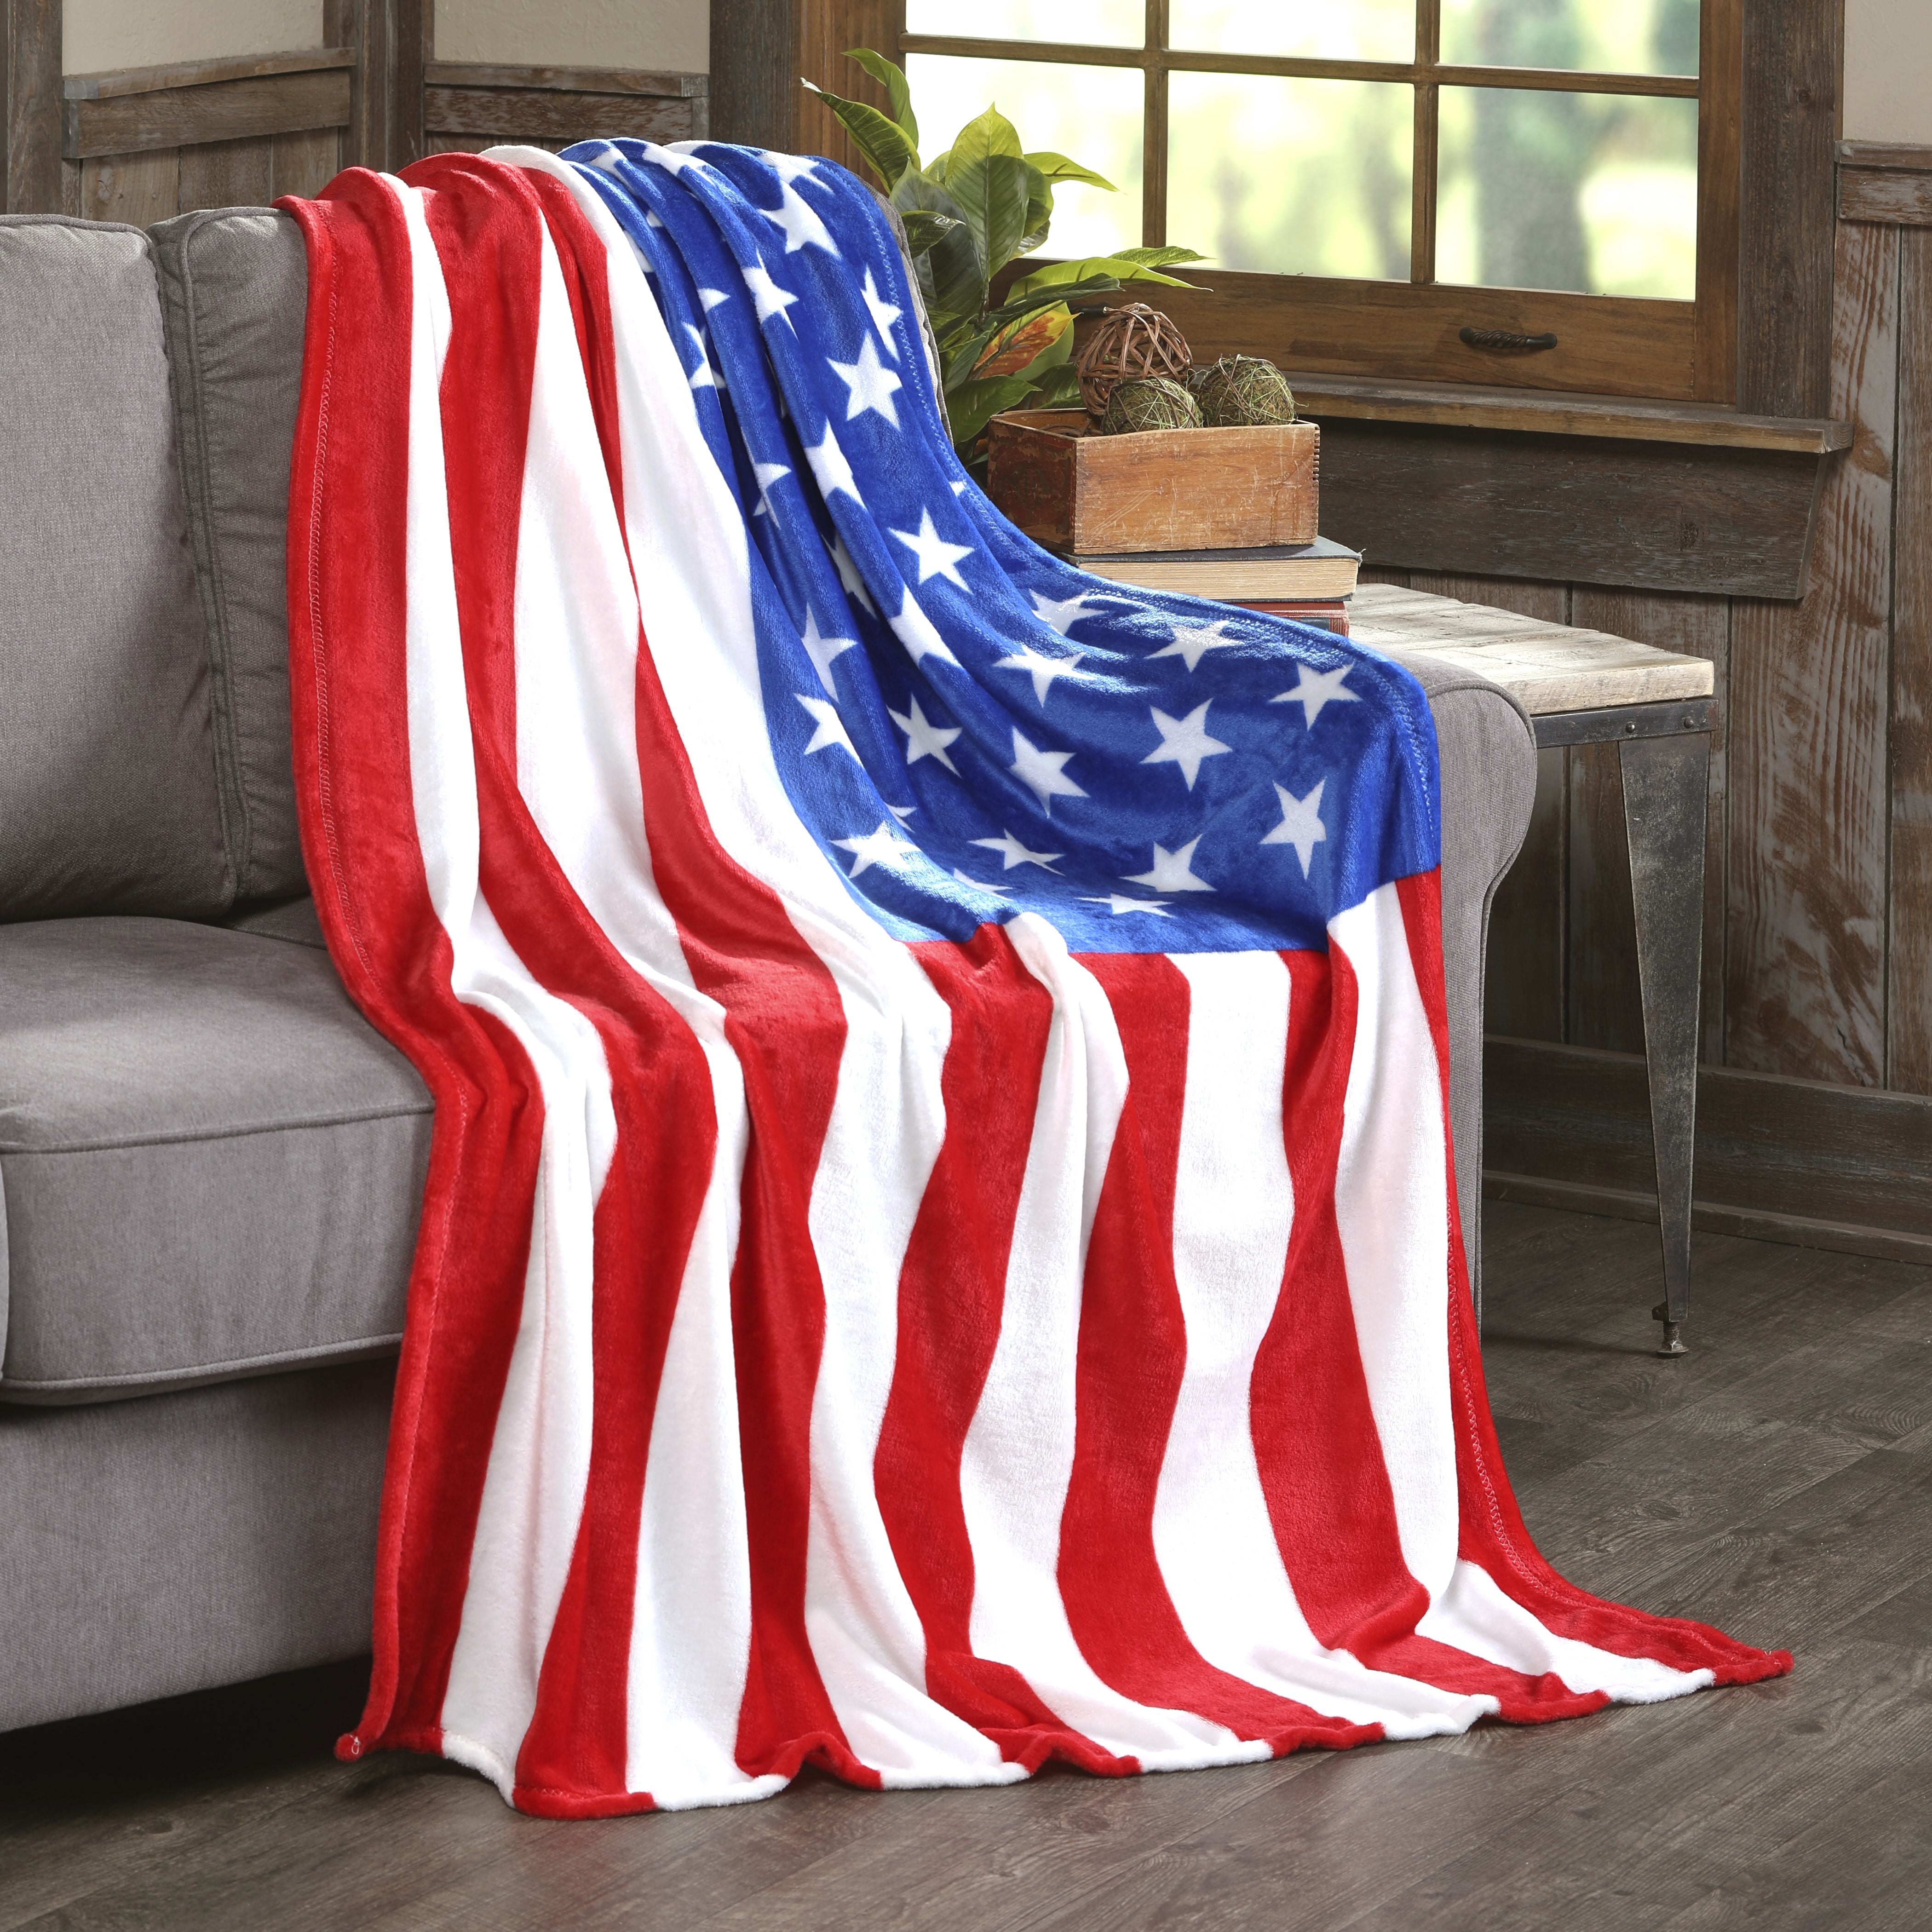 Ultra Soft & Cozy Oversized U.S.A Patriotic Ultra Plush Throw Blanket Cover 